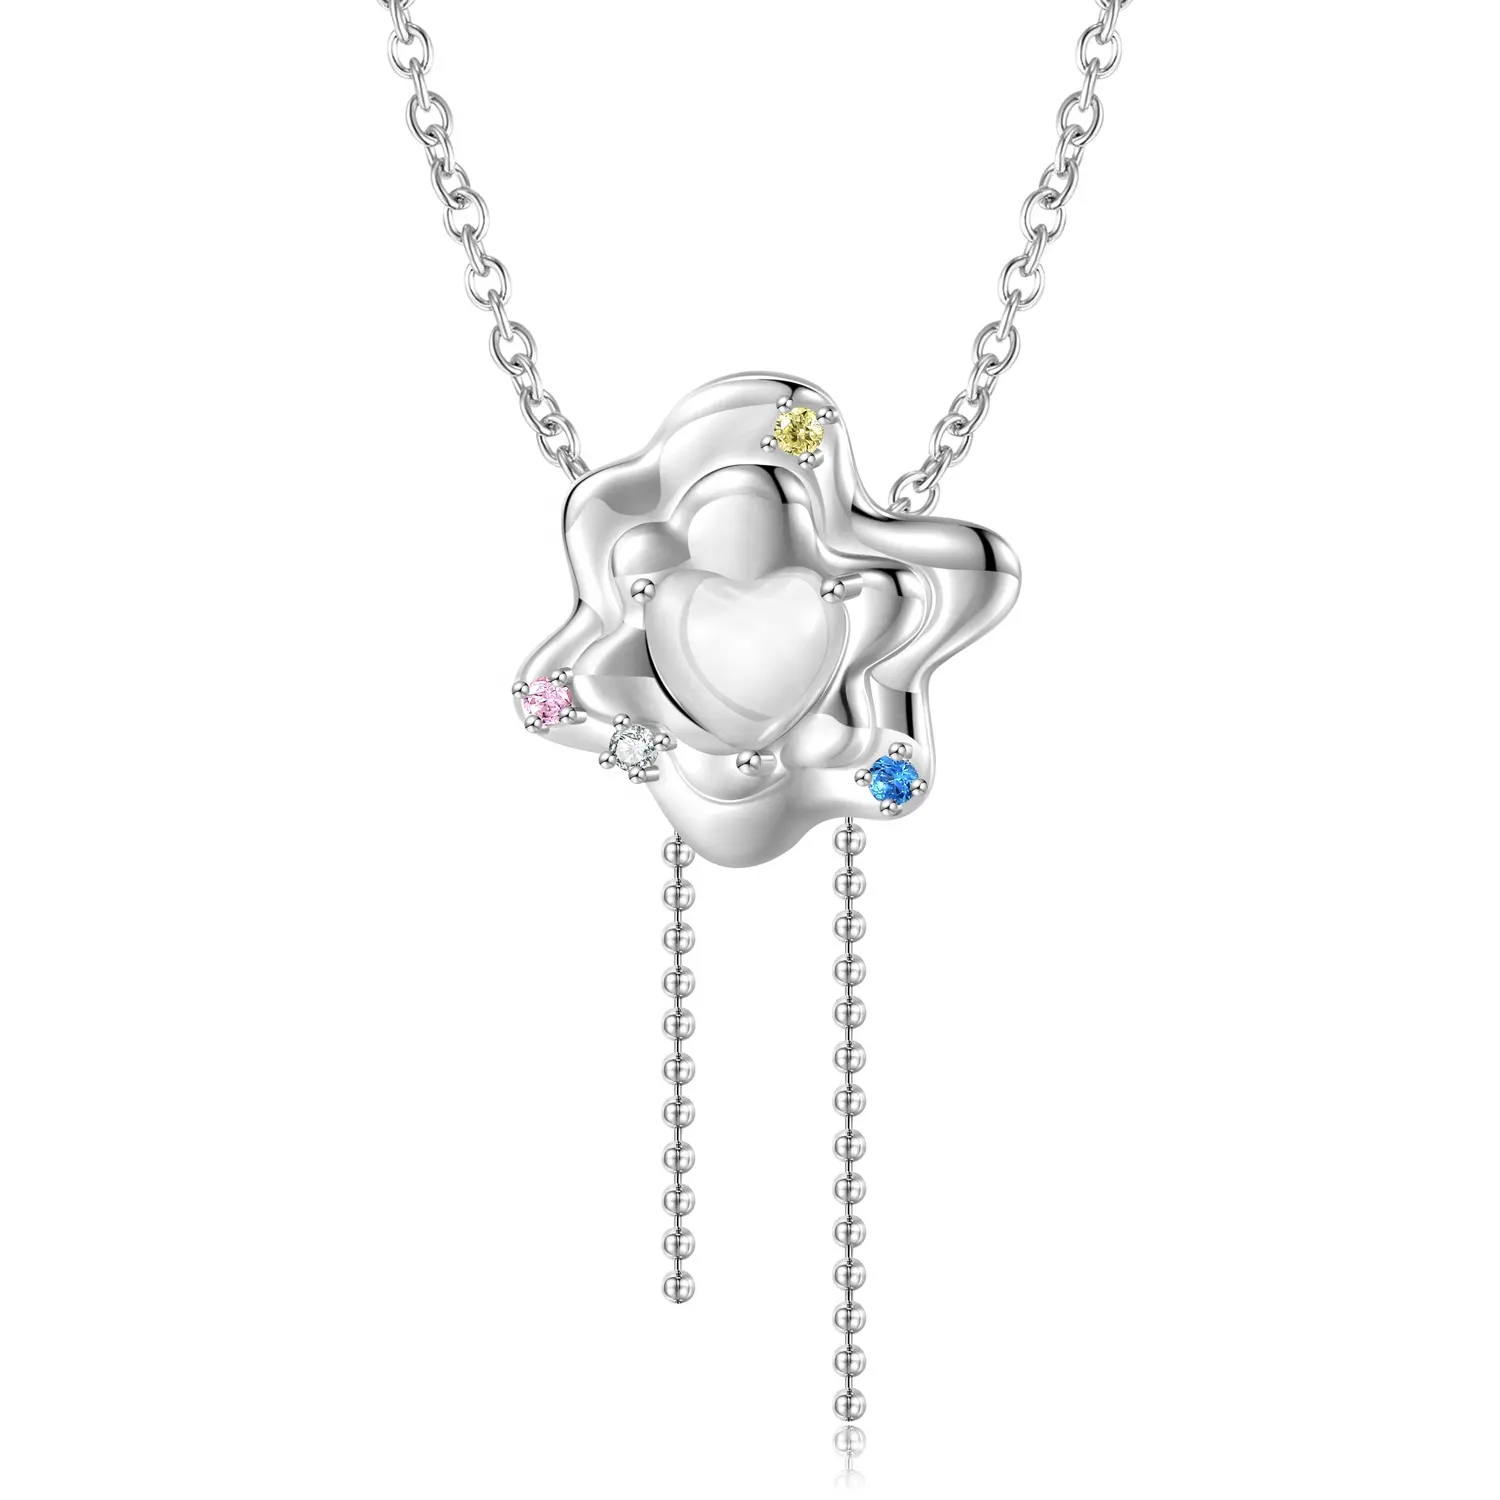 Irregular Flowers Embrace Love Pendant With Zirconia For Necklace Real 925 Sterling Silver Chain Necklaces Jewelry For Women